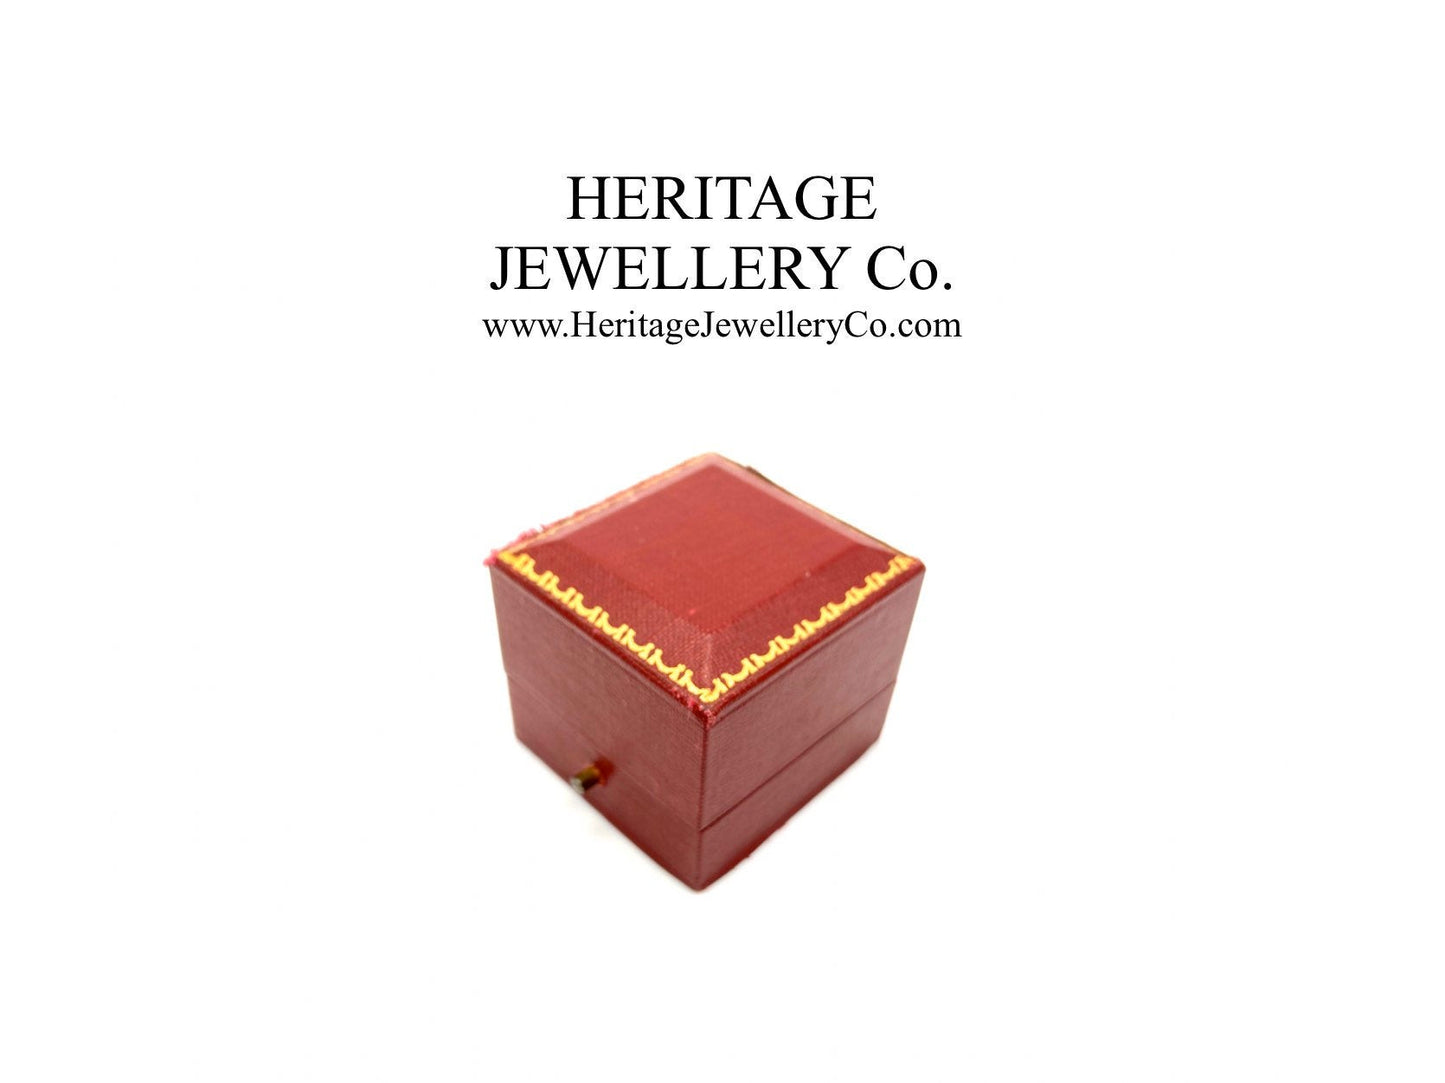 Vintage Tooled Leather Ring Box with Gold Trim